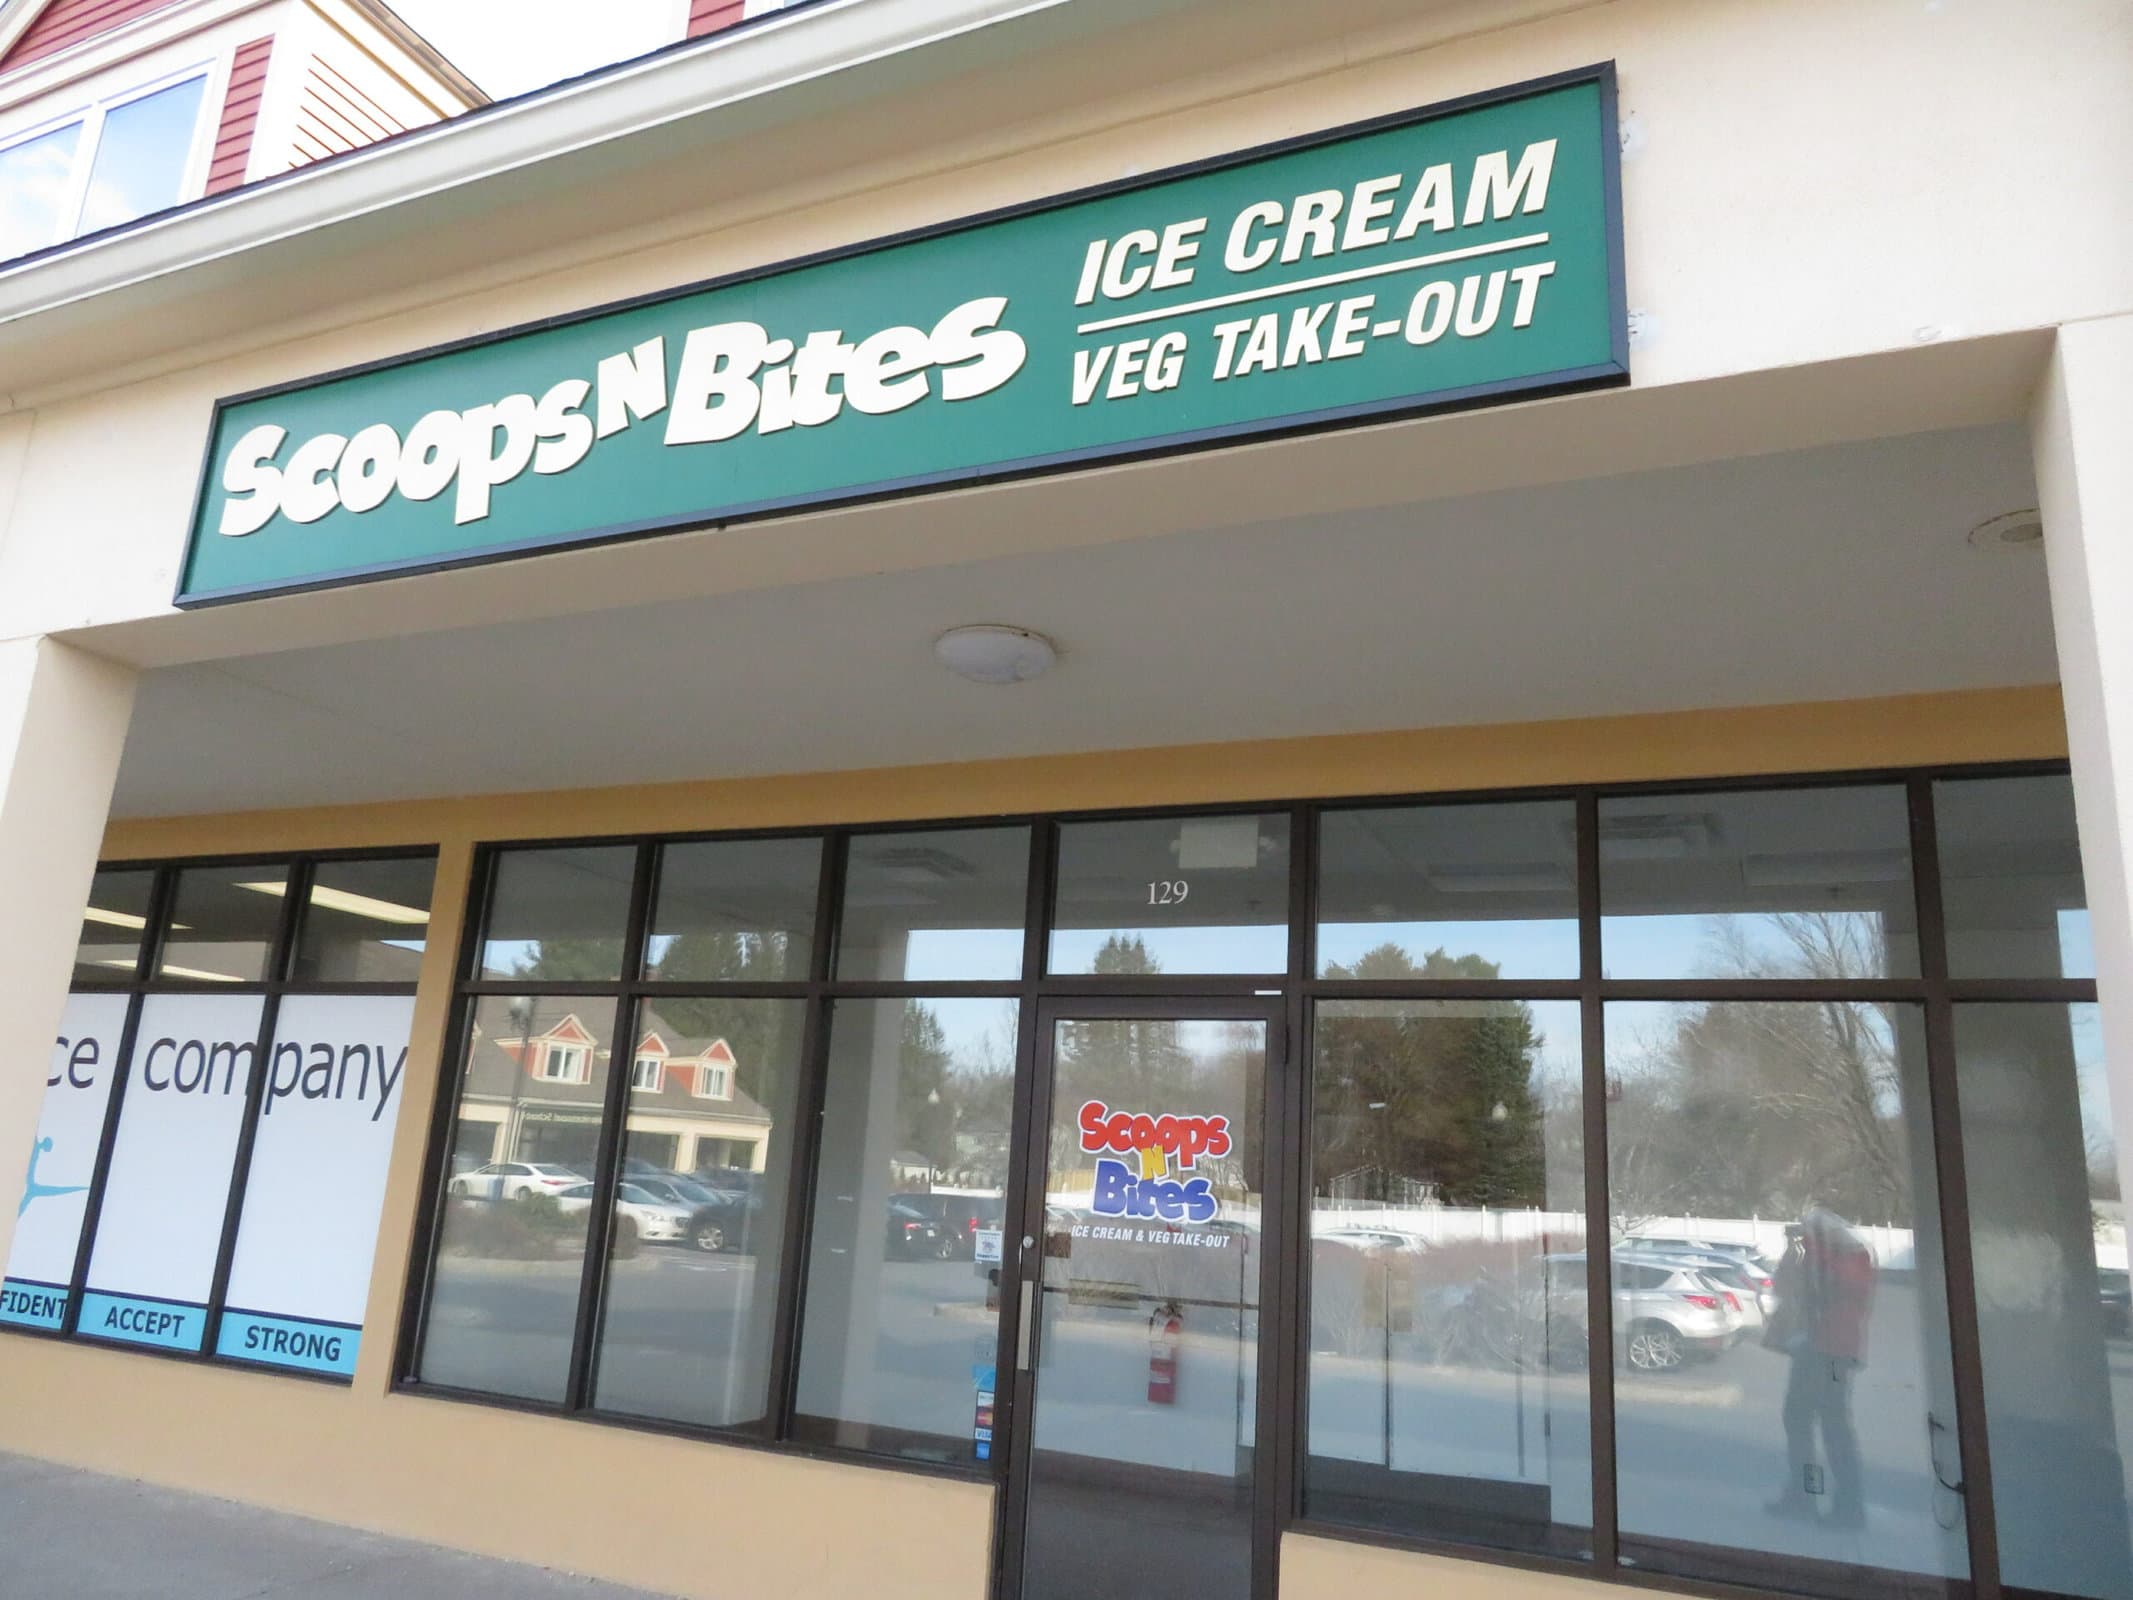 Tenants being sought for Scoops N Bites space in Westborough